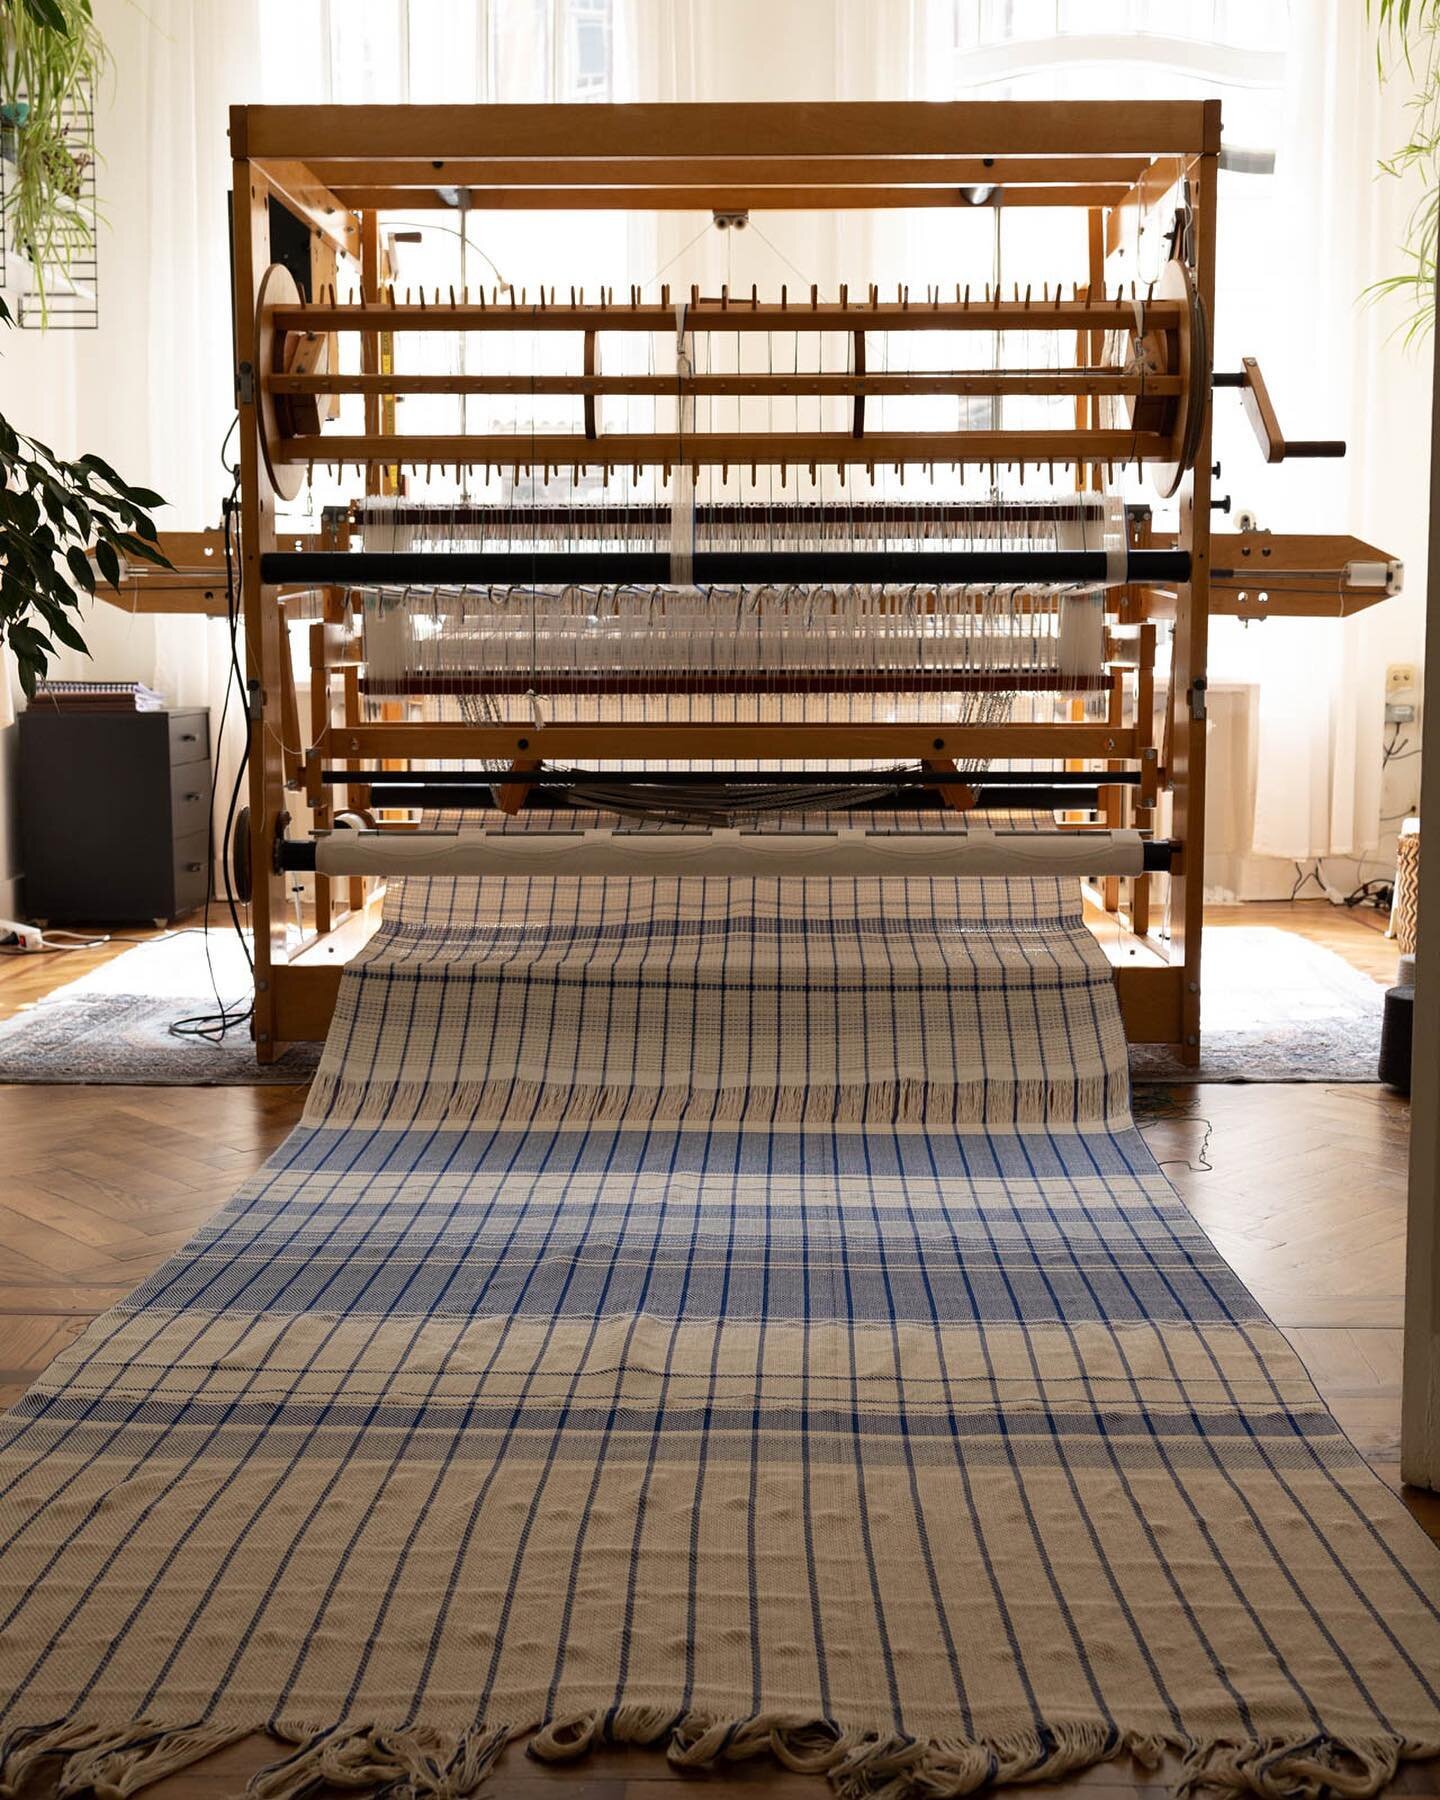 Finished my first big warp &bull; Very happy with the results of my first full width warp! I do think I spend more time setting up the loom, then I did weaving it off using the flying shuttle... This loom stores your woven fabric at the back so you c